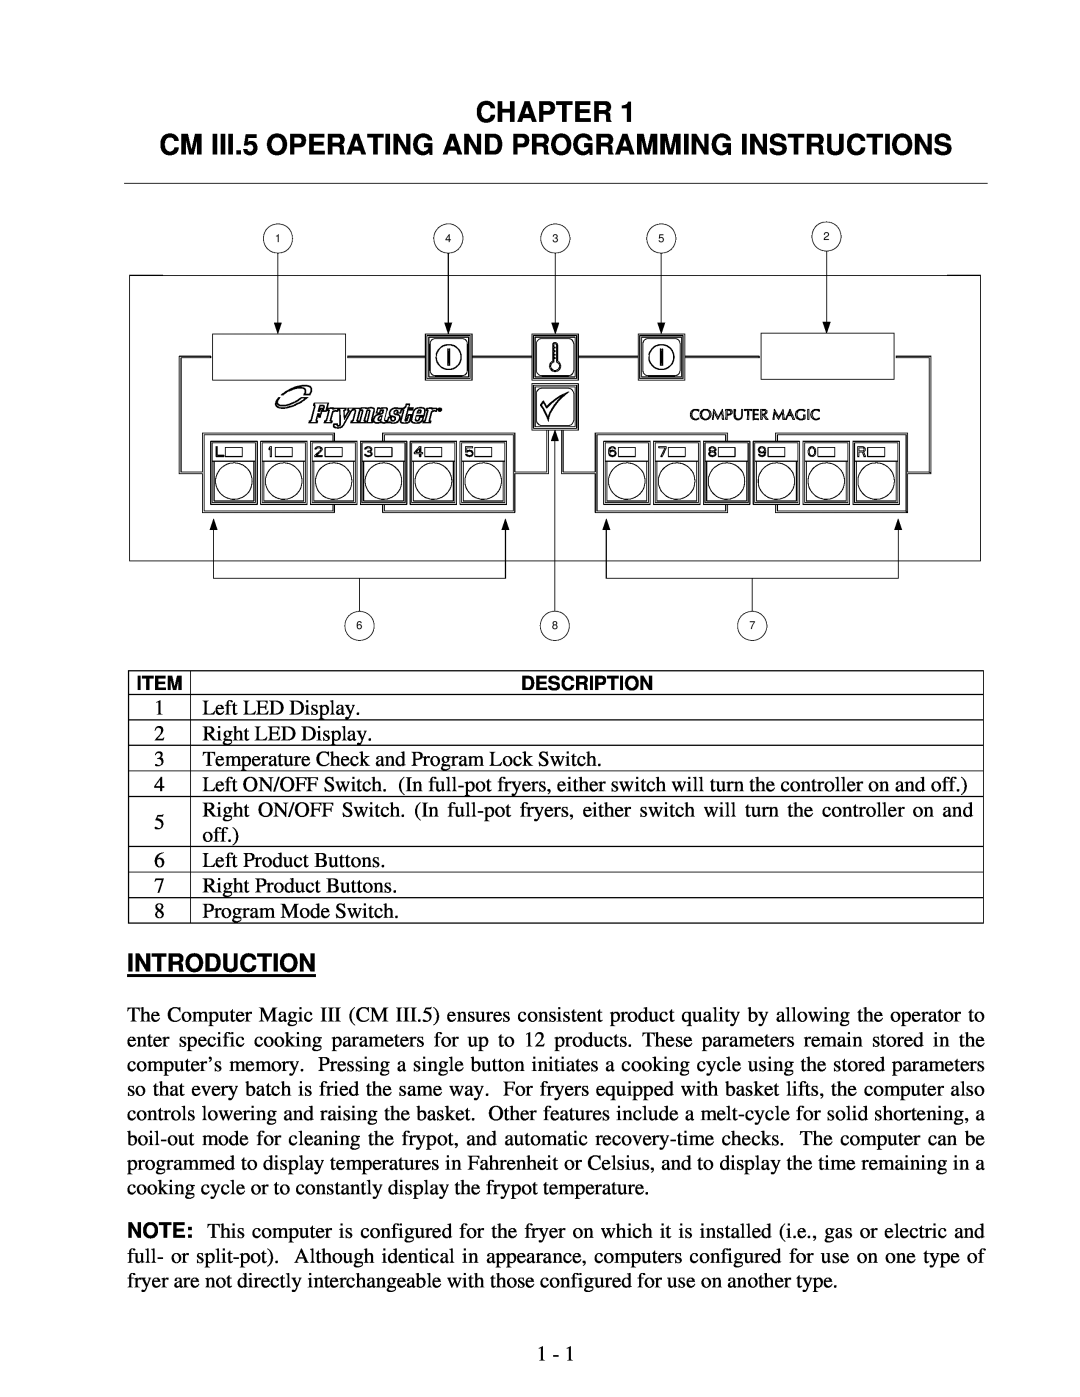 Frymaster 8195916 user manual CHAPTER CM III.5 OPERATING AND PROGRAMMING INSTRUCTIONS, Introduction 